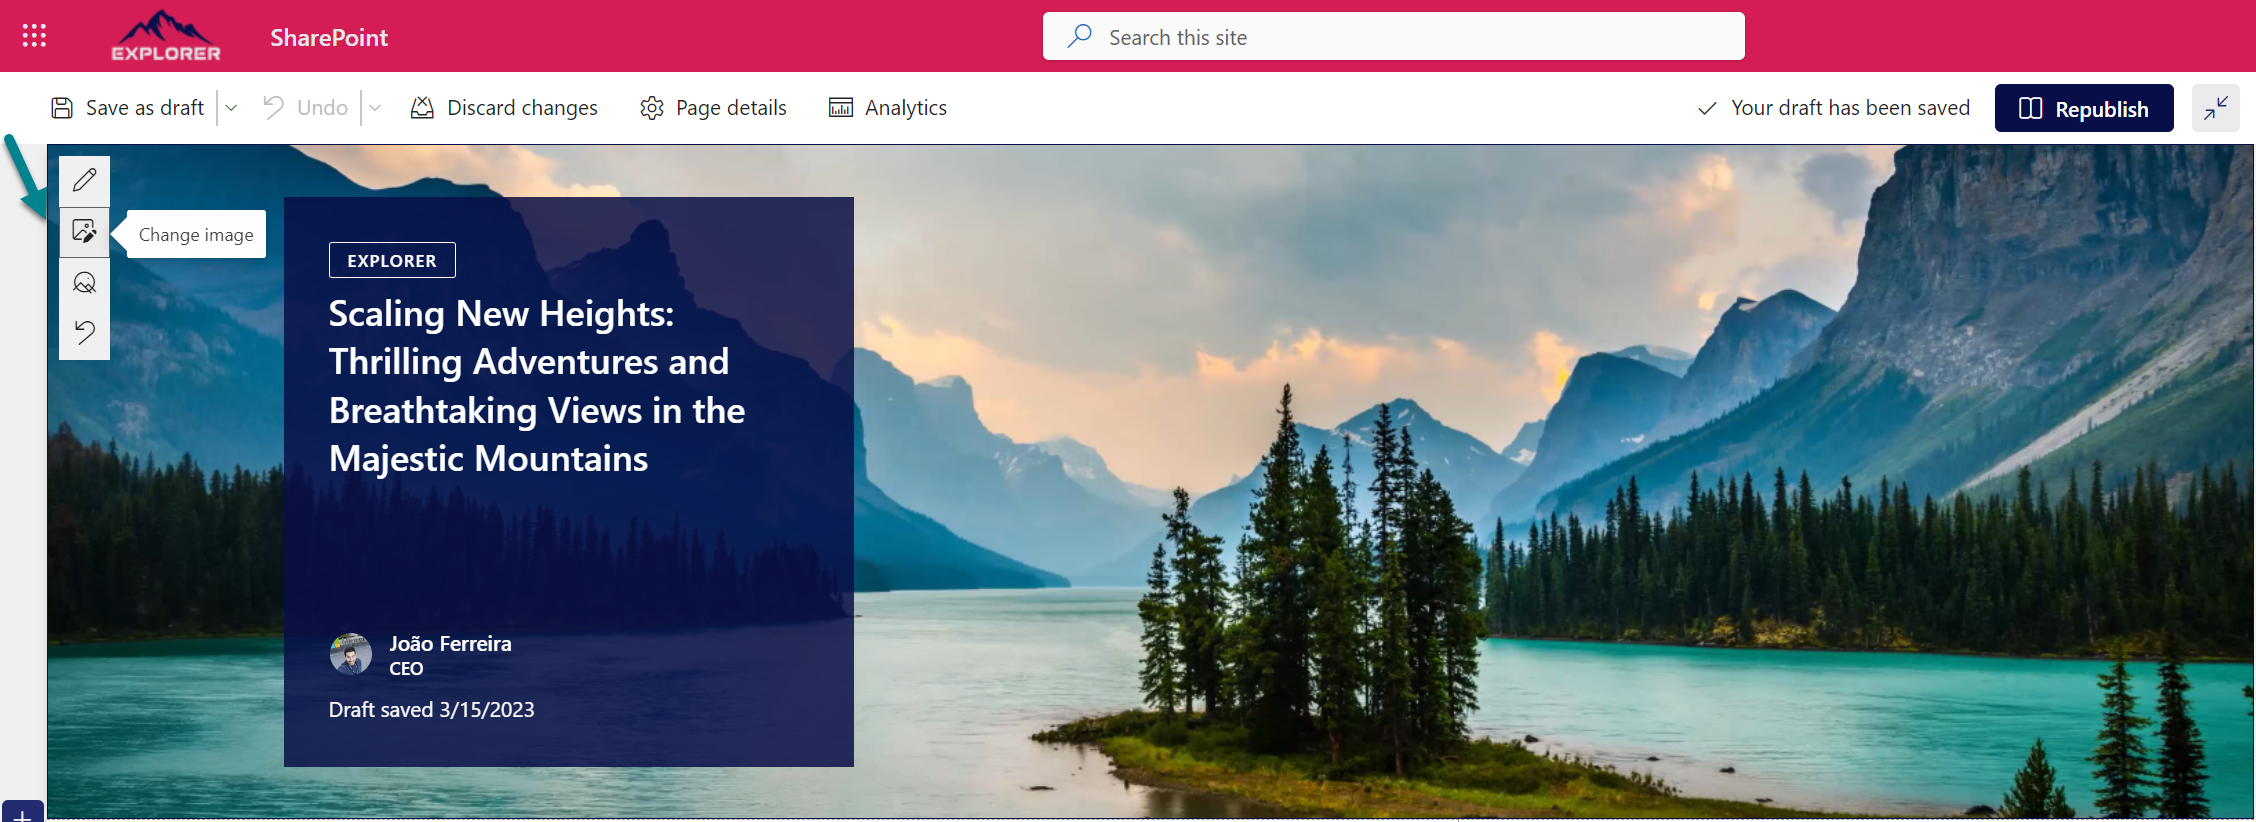 SharePoint pages video background